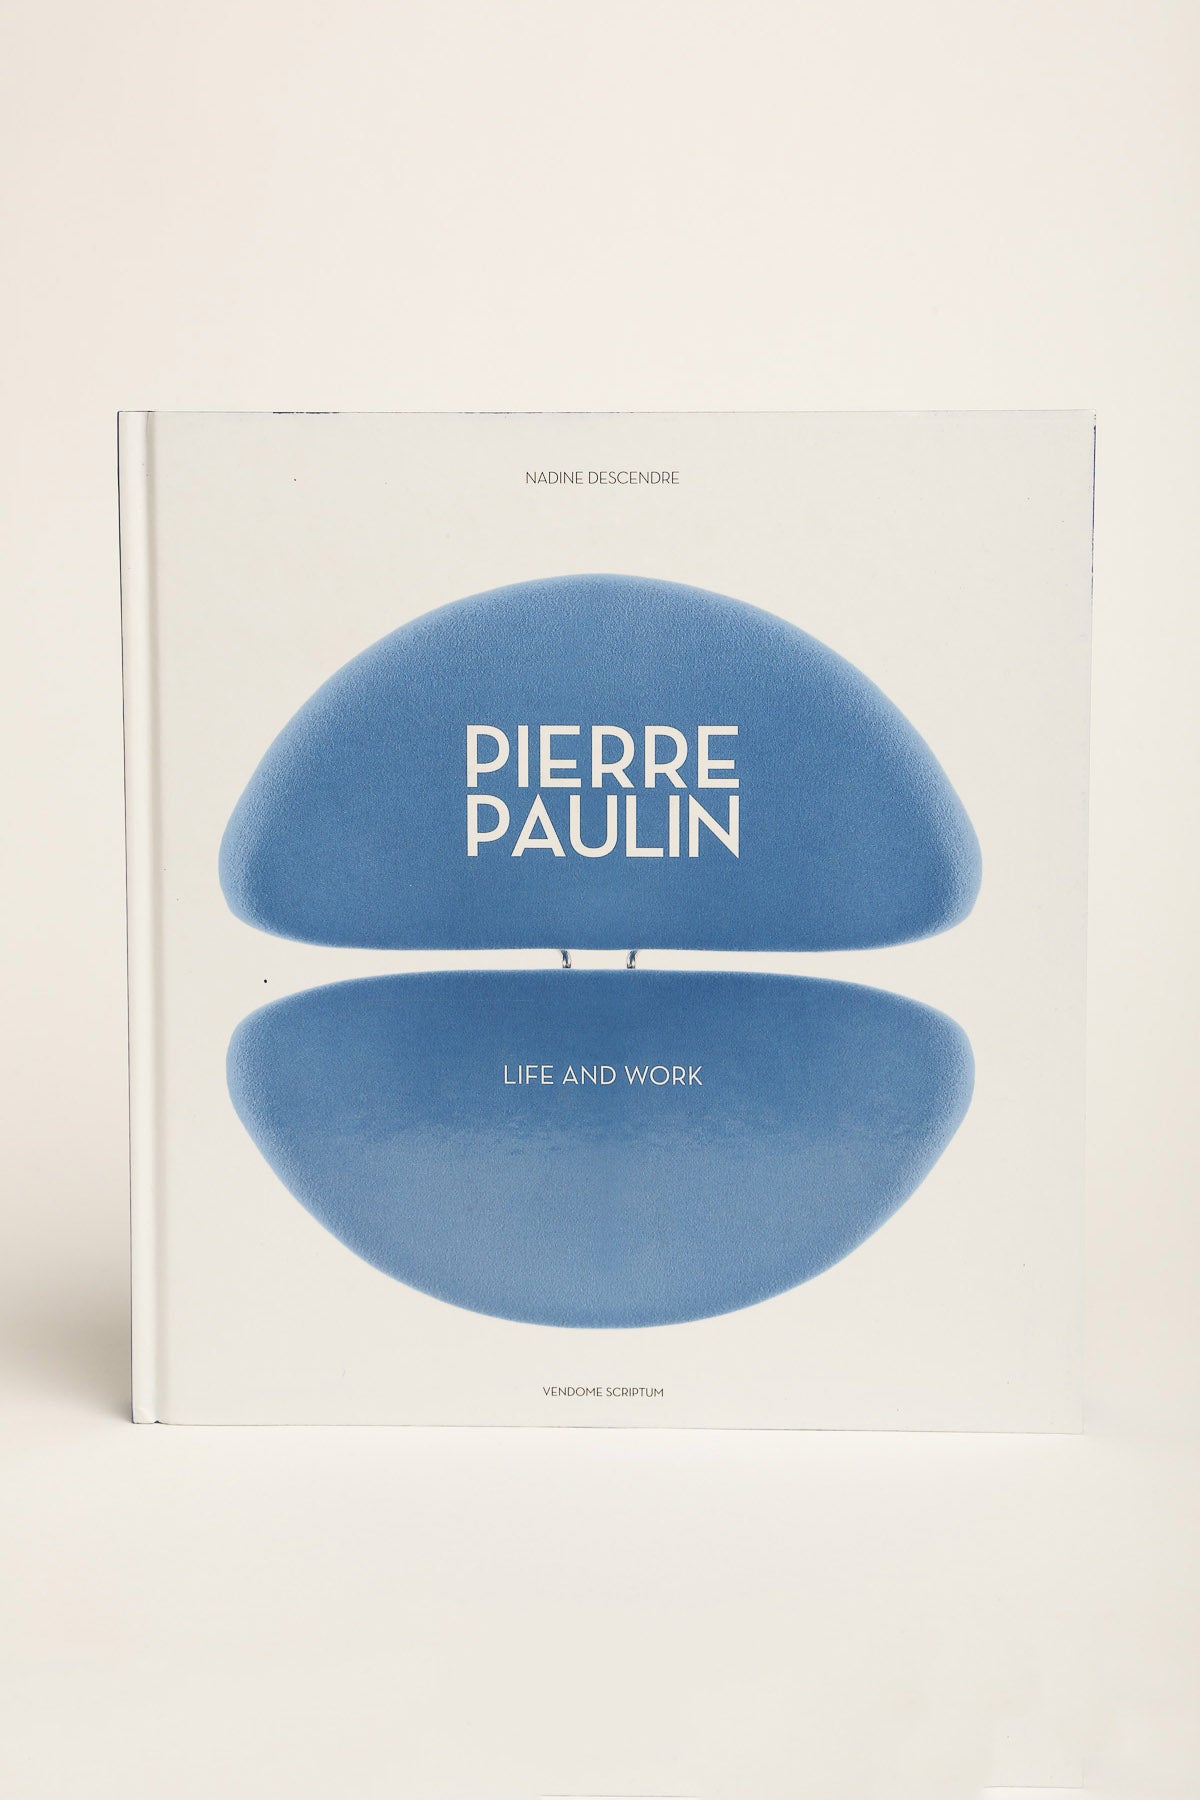 ABRAMS | PIERRE PAULIN: LIFE AND WORK